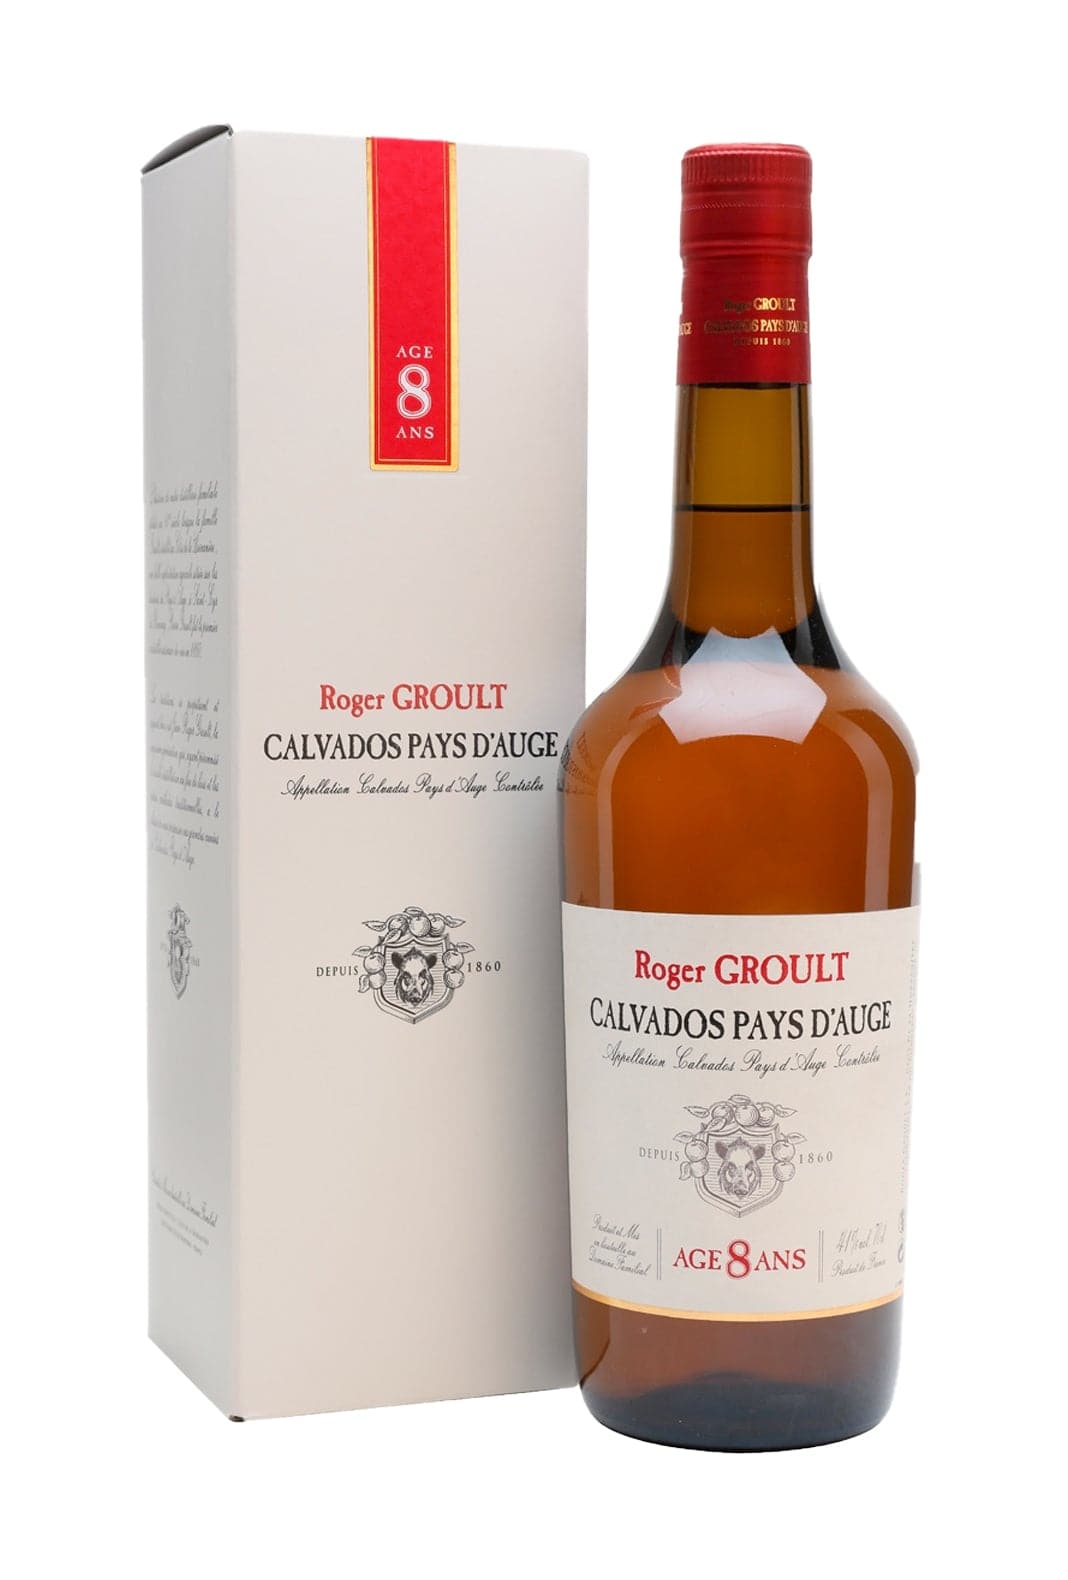 Roger Groult Calvados Pays D'Auge 8 years 41% 700ml | Brandy | Shop online at Spirits of France